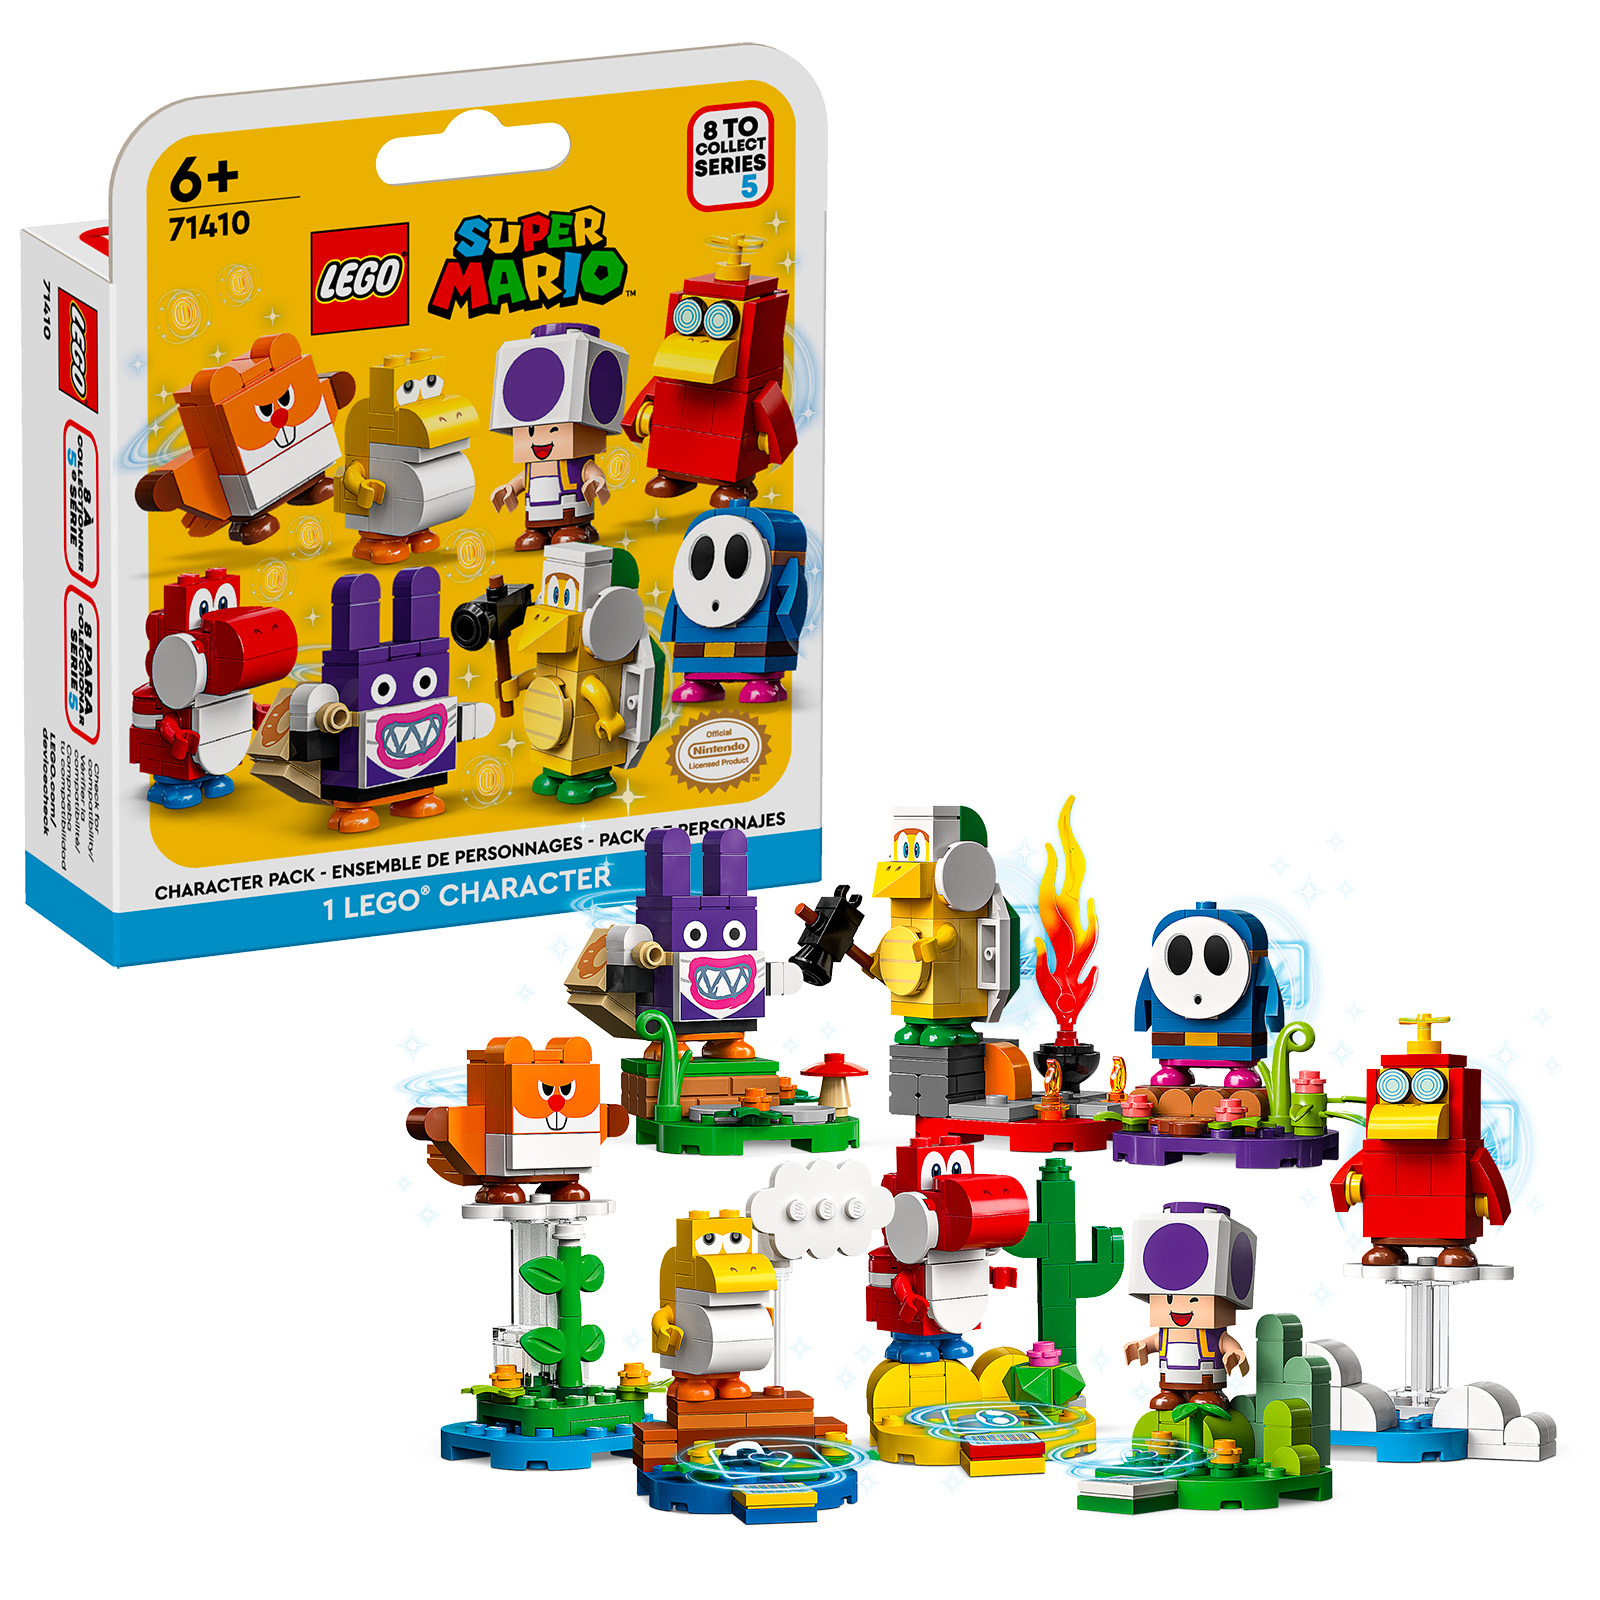 New LEGO Super Mario: the fifth series of characters to collect is online on the Shop